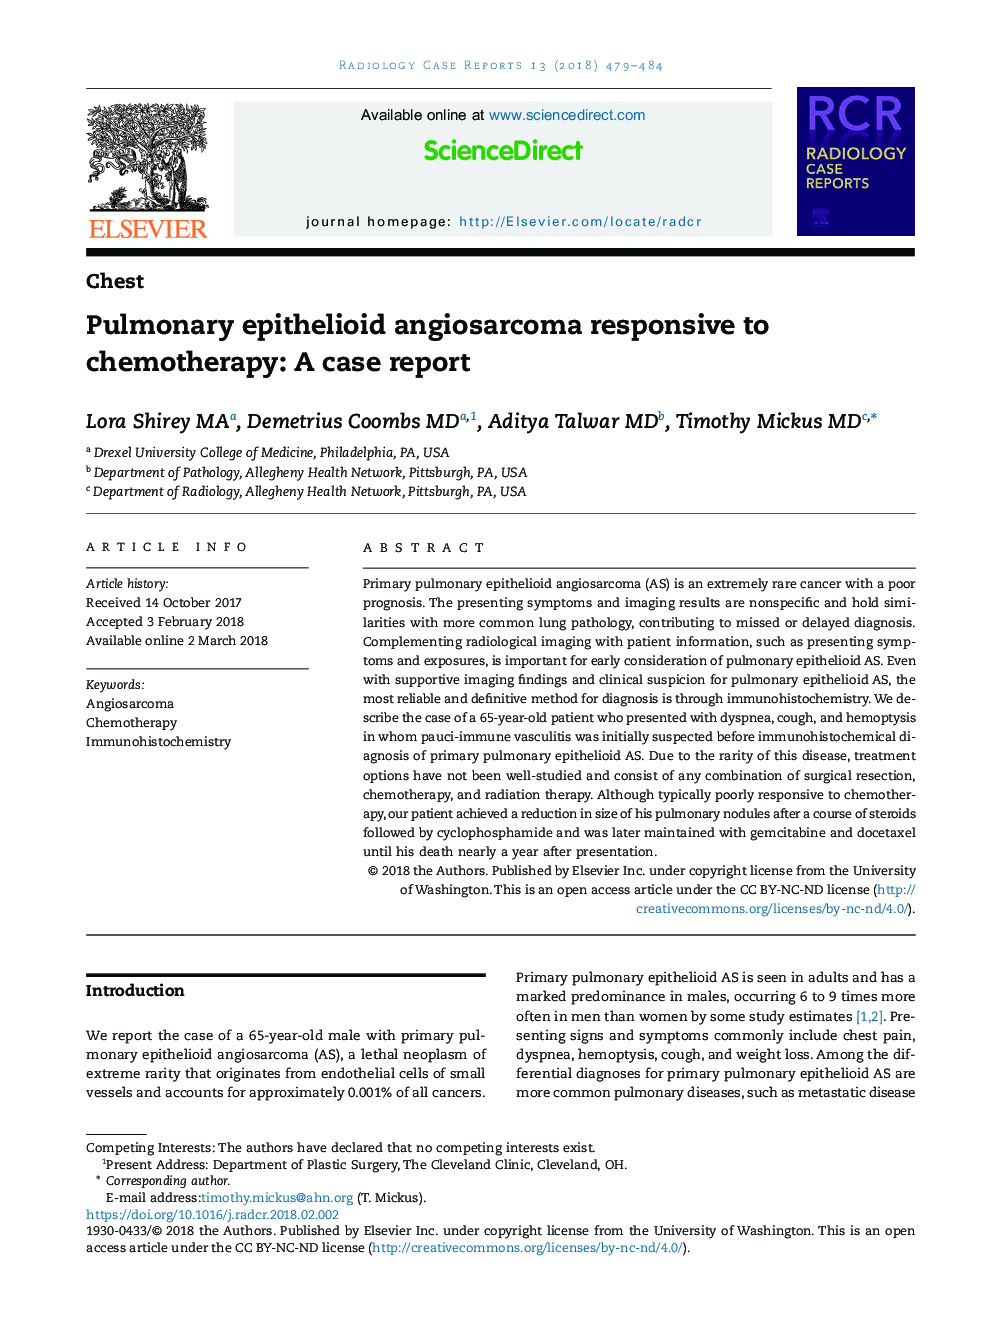 Pulmonary epithelioid angiosarcoma responsive to chemotherapy: A case report